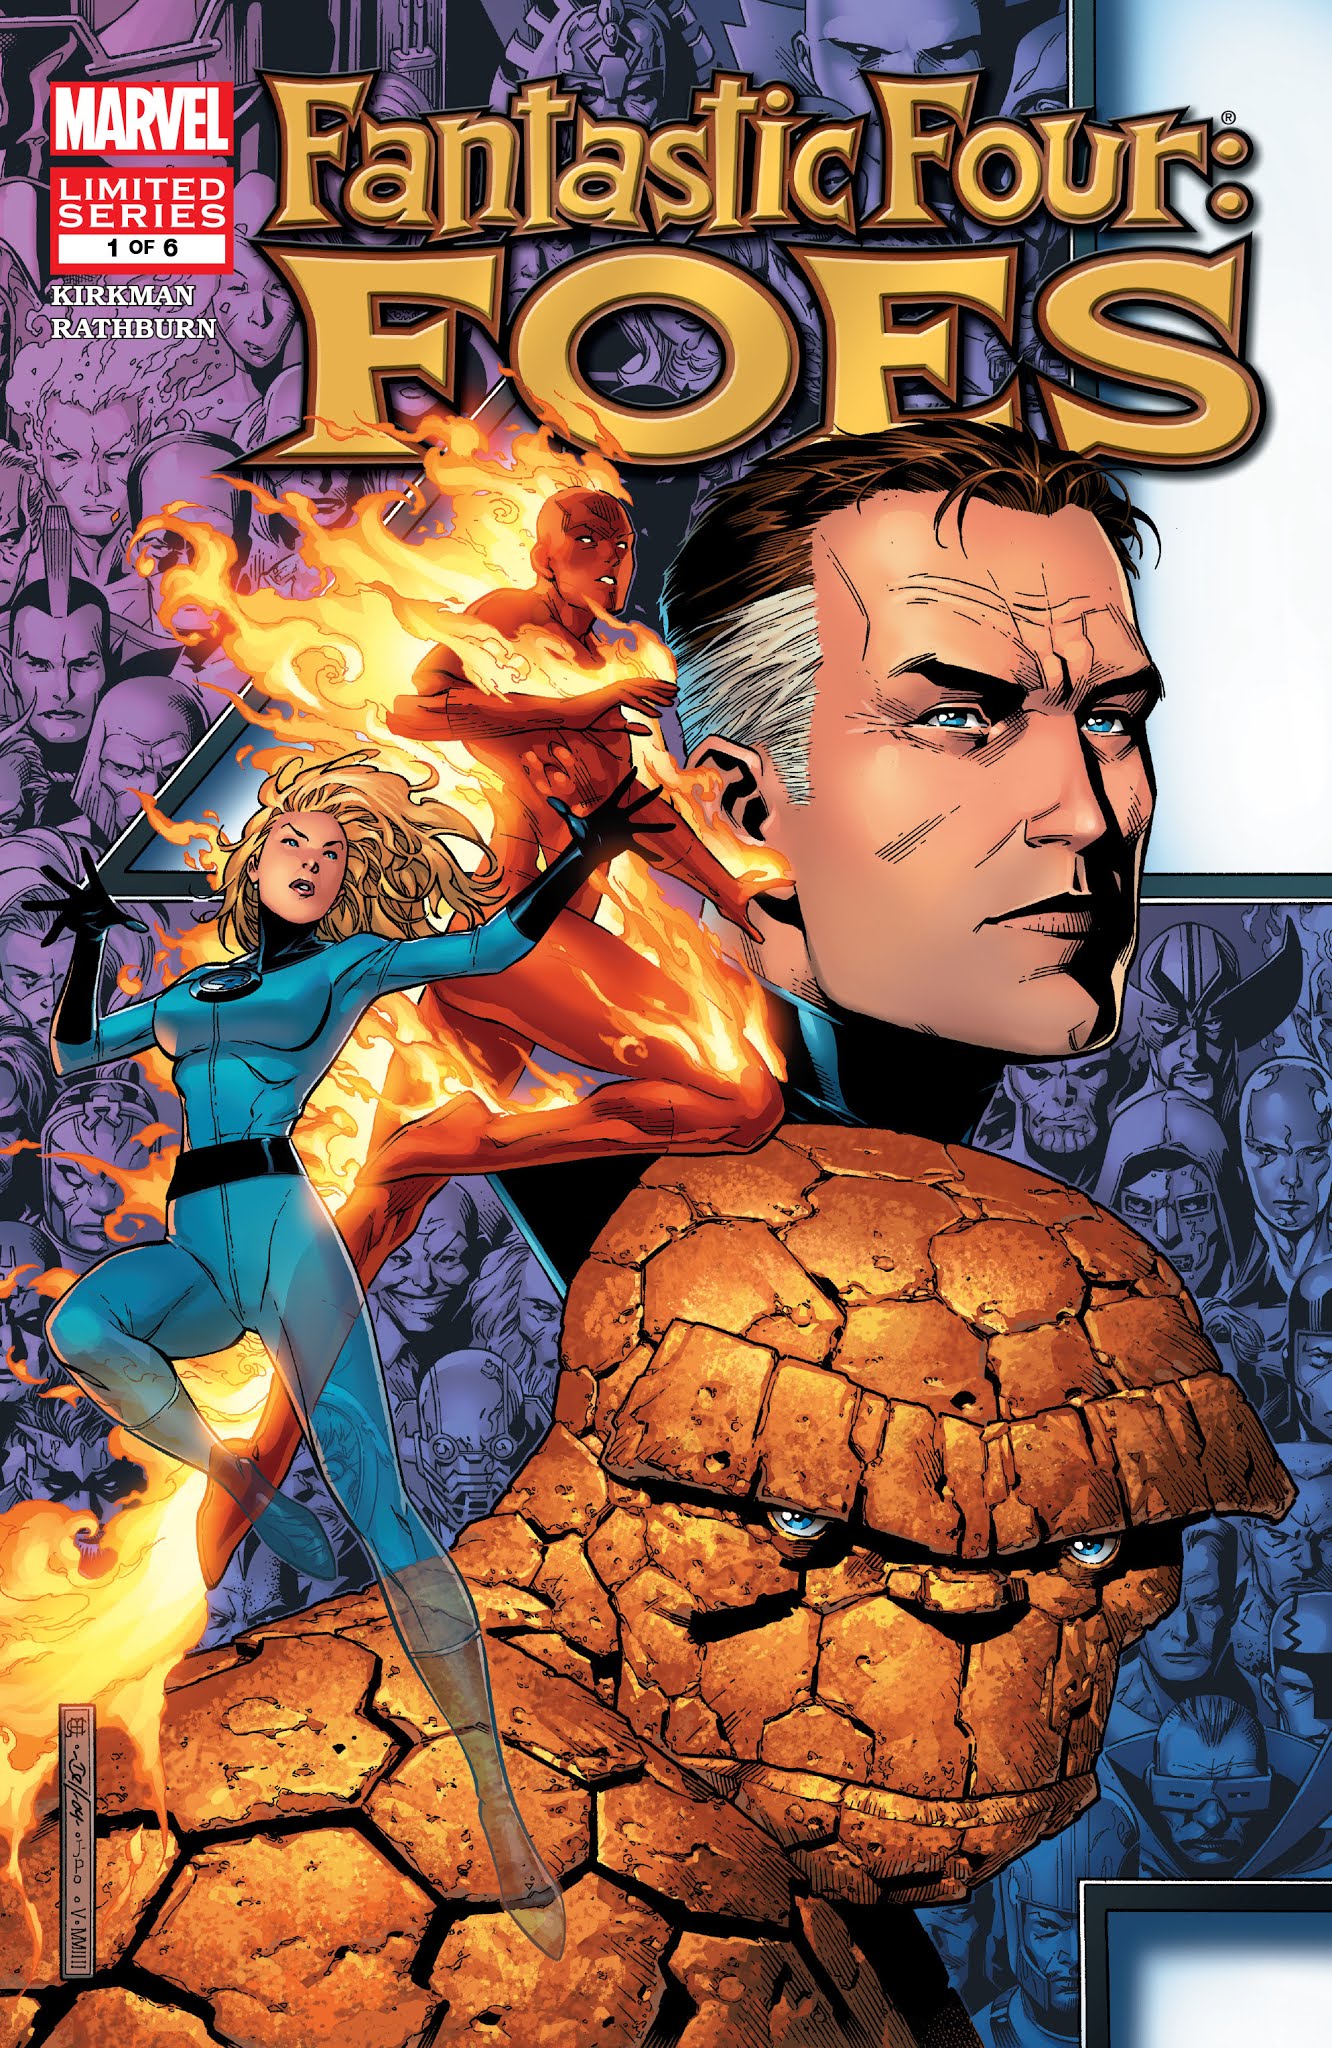 Read online Fantastic Four: Foes comic -  Issue #1 - 1